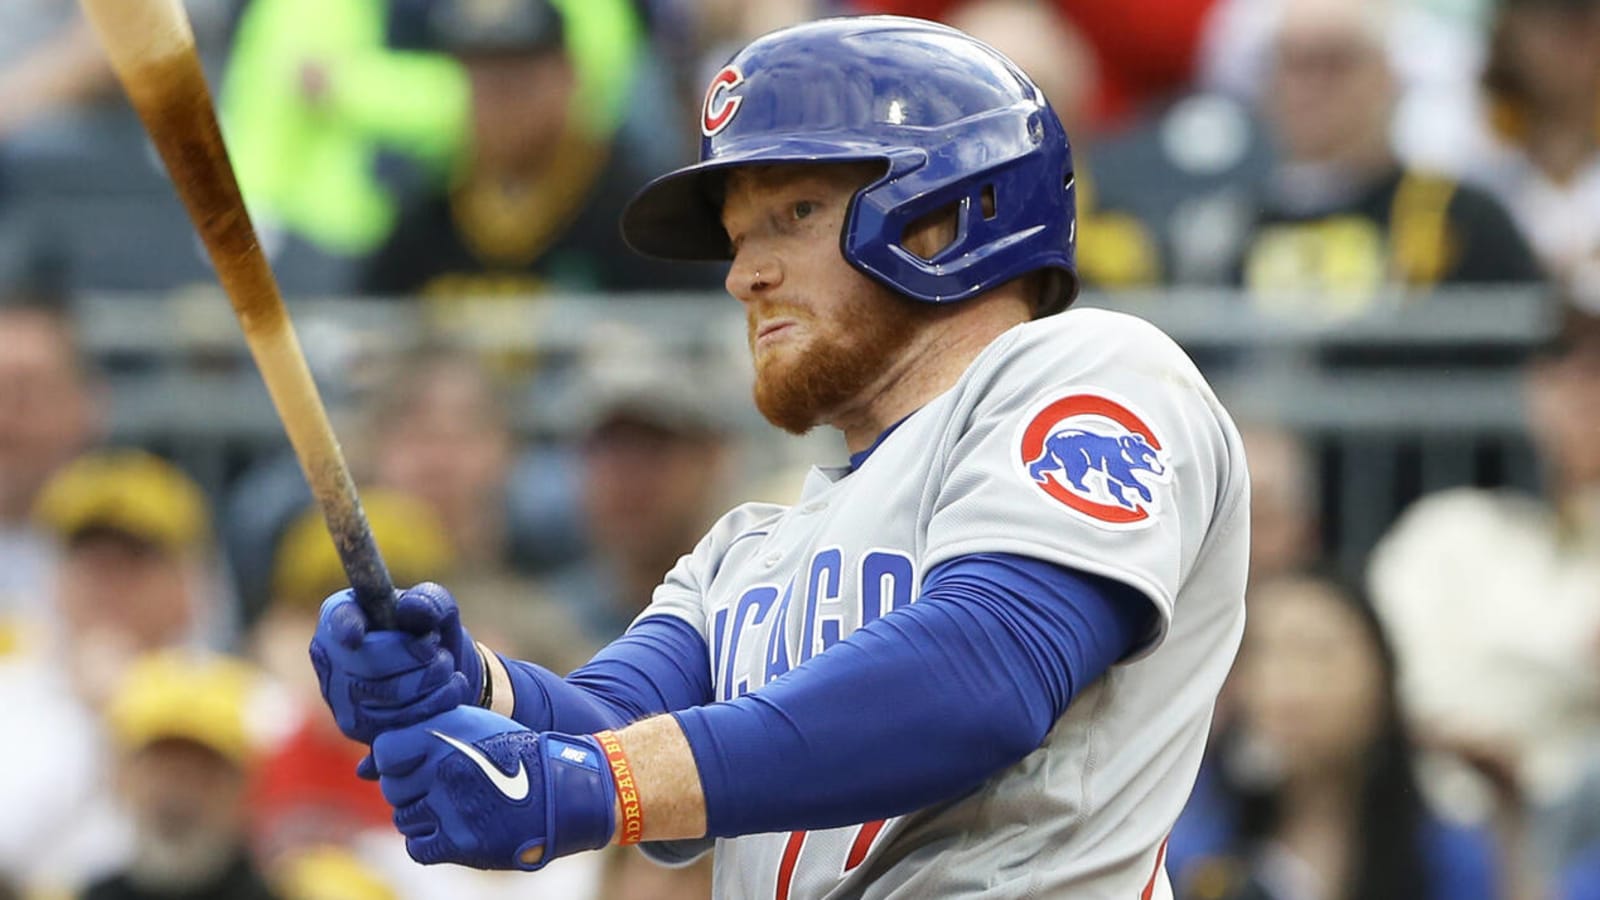 Cubs designate Clint Frazier for assignment, make other moves